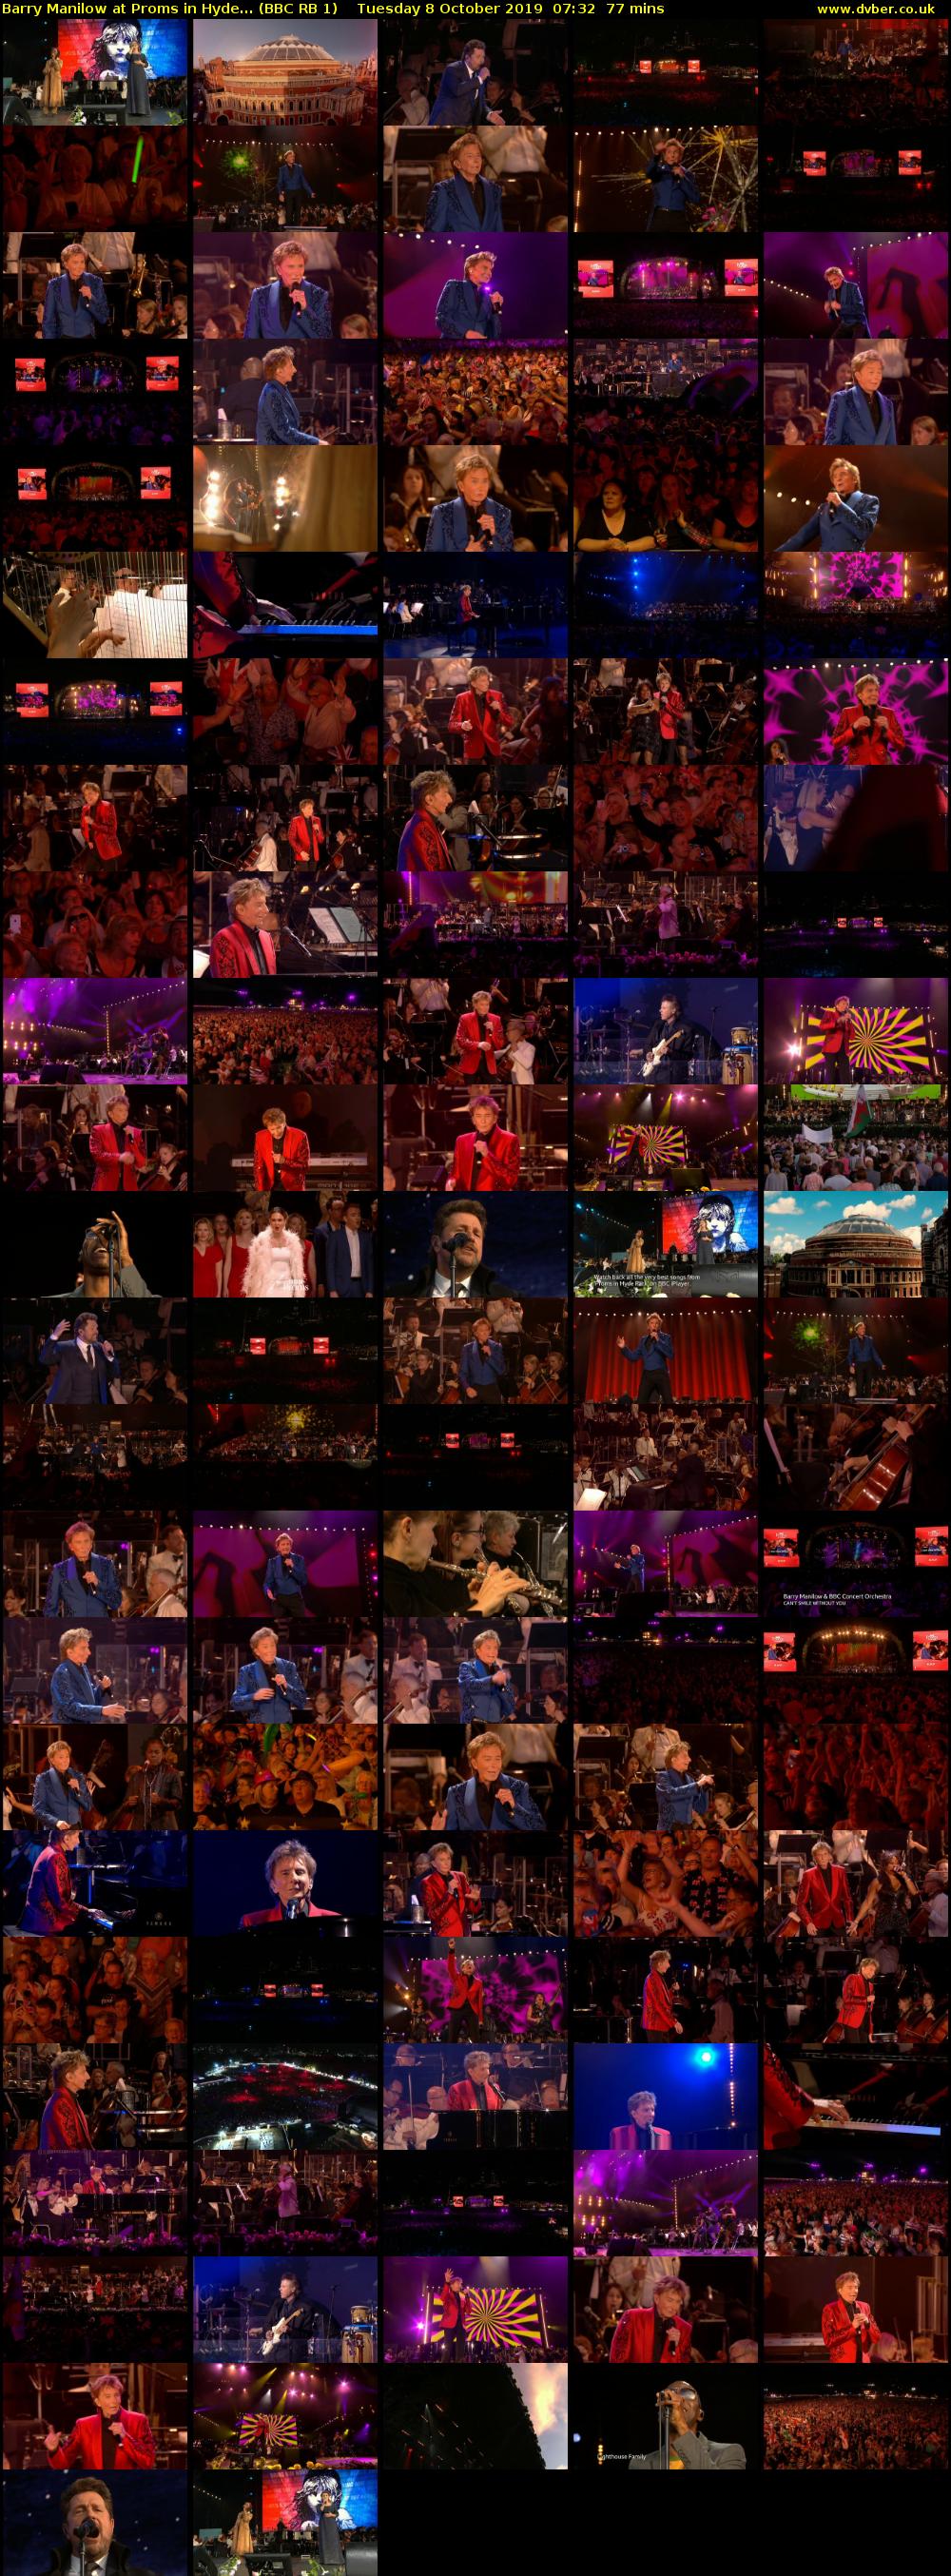 Barry Manilow at Proms in Hyde... (BBC RB 1) Tuesday 8 October 2019 07:32 - 08:49